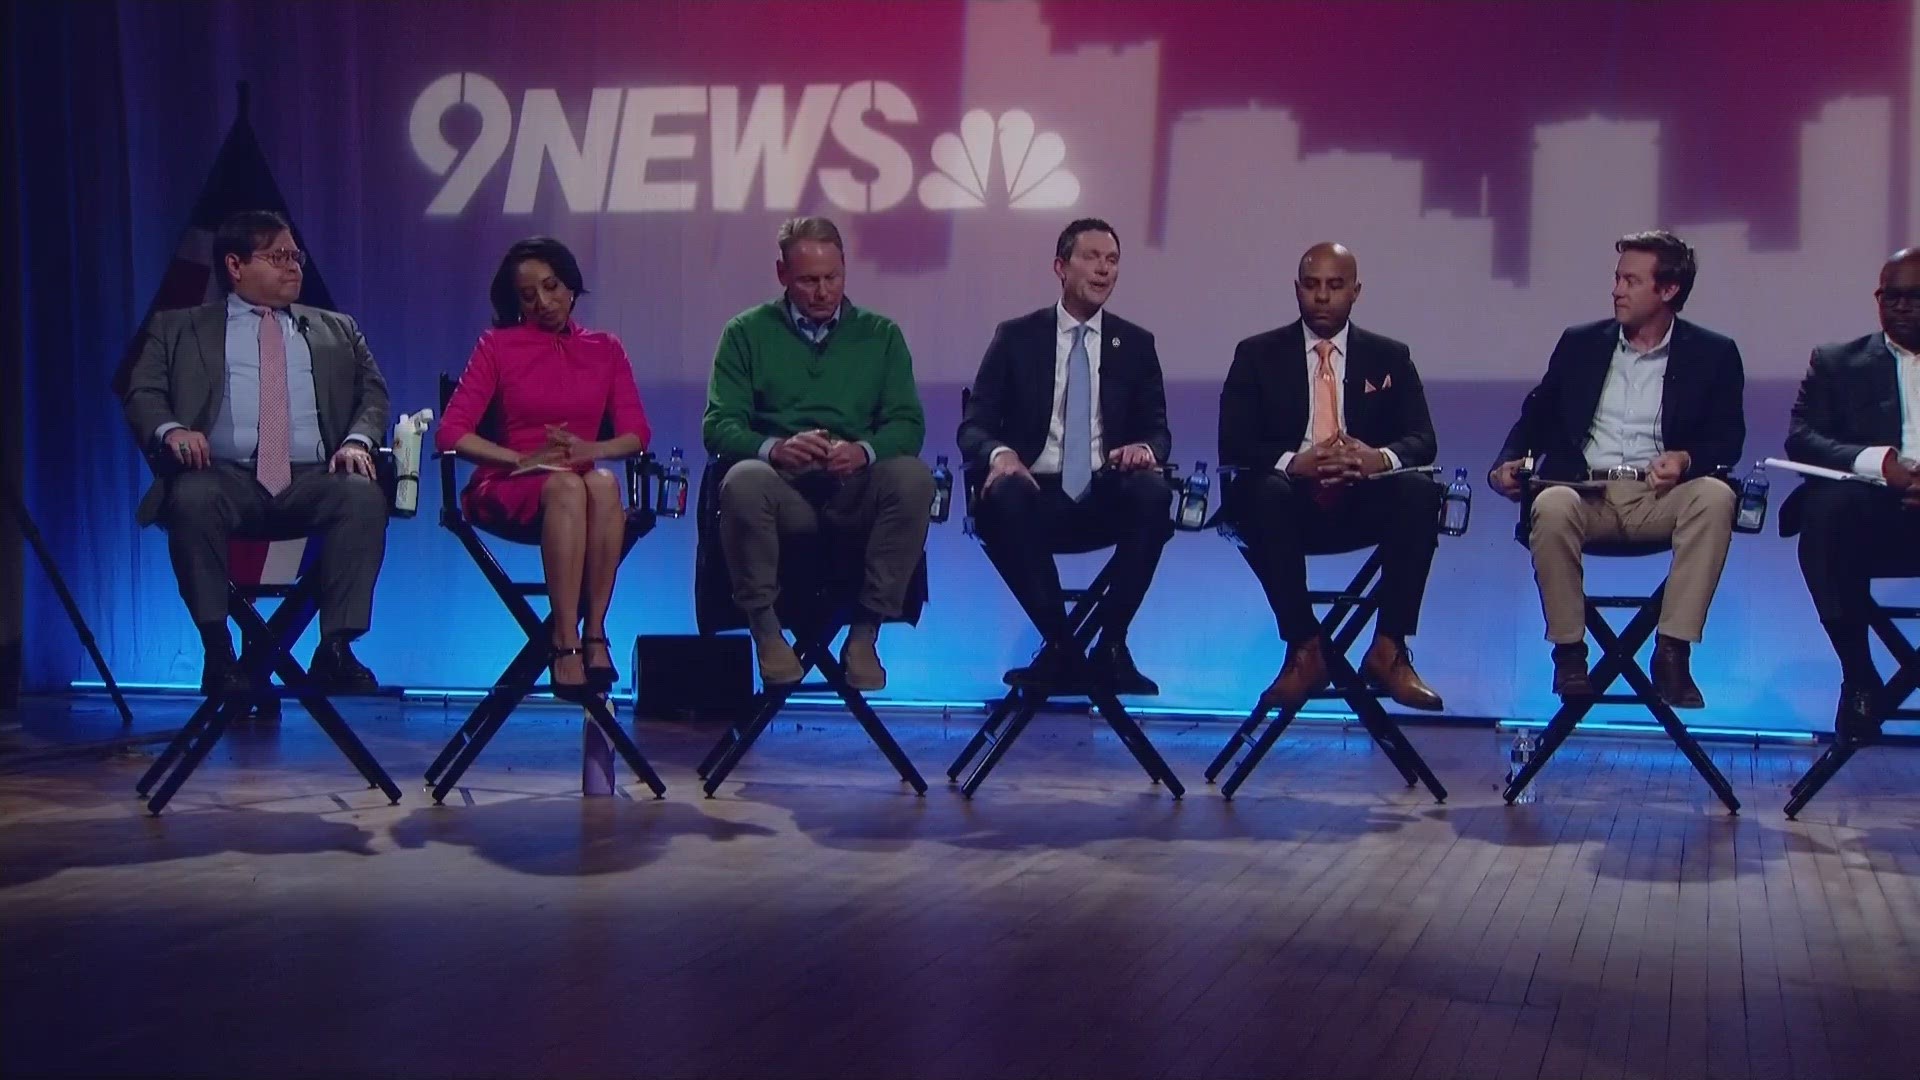 Eleven of the 17 candidates for mayor were selected for this debate based on polling numbers.